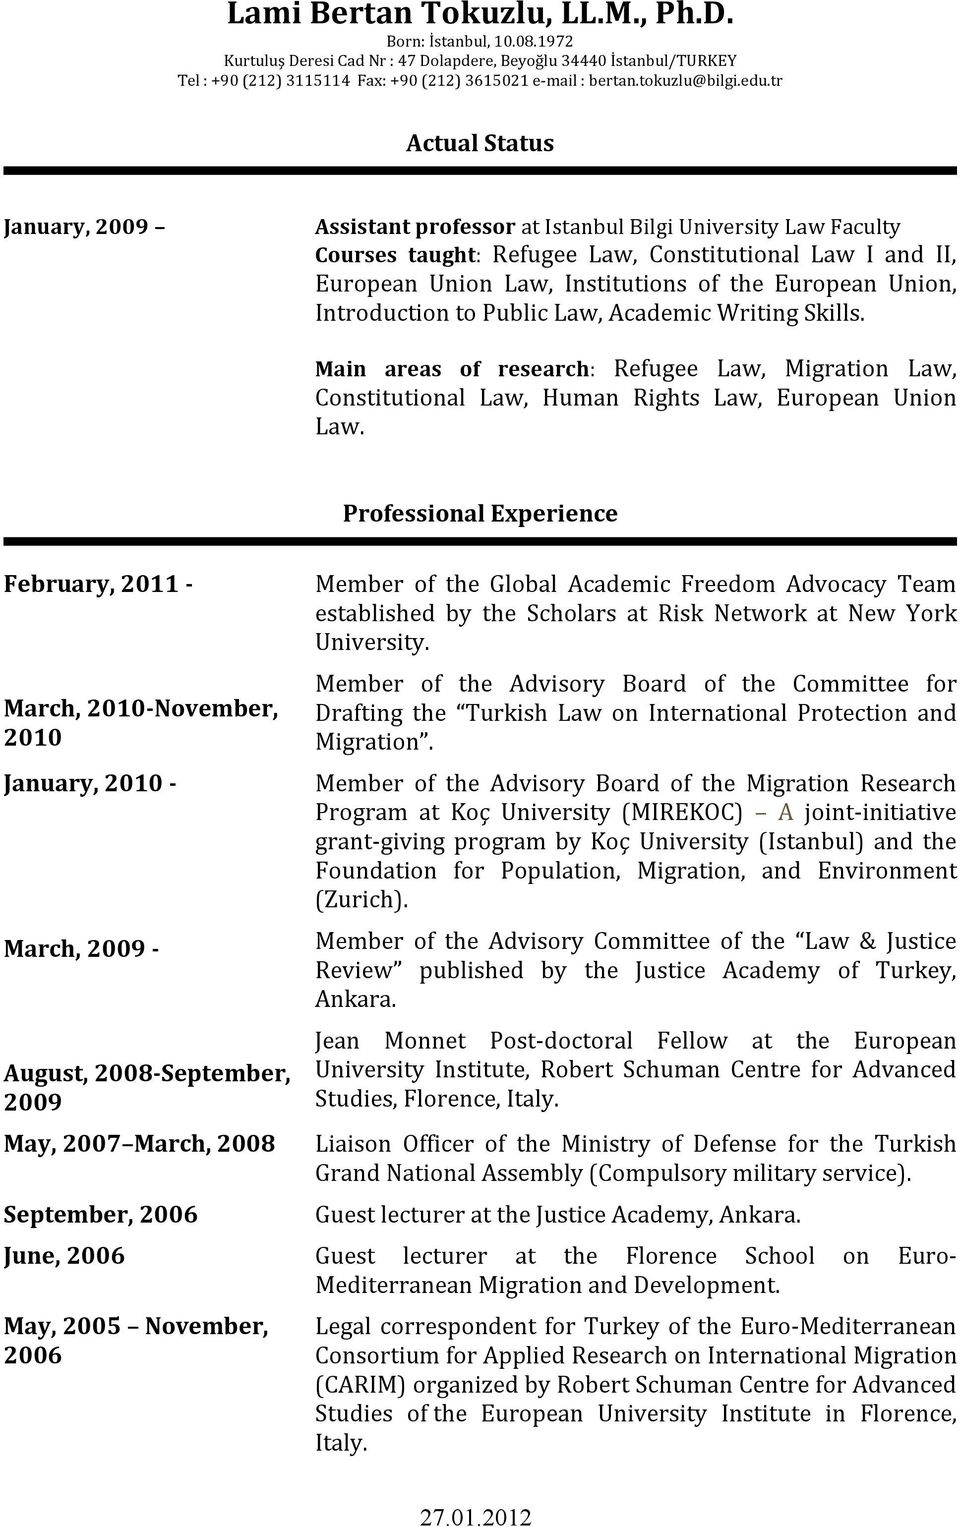 tr Actual Status January, 2009 Assistant professor at Istanbul Bilgi University Law Faculty Courses taught: Refugee Law, Constitutional Law I and II, European Union Law, Institutions of the European